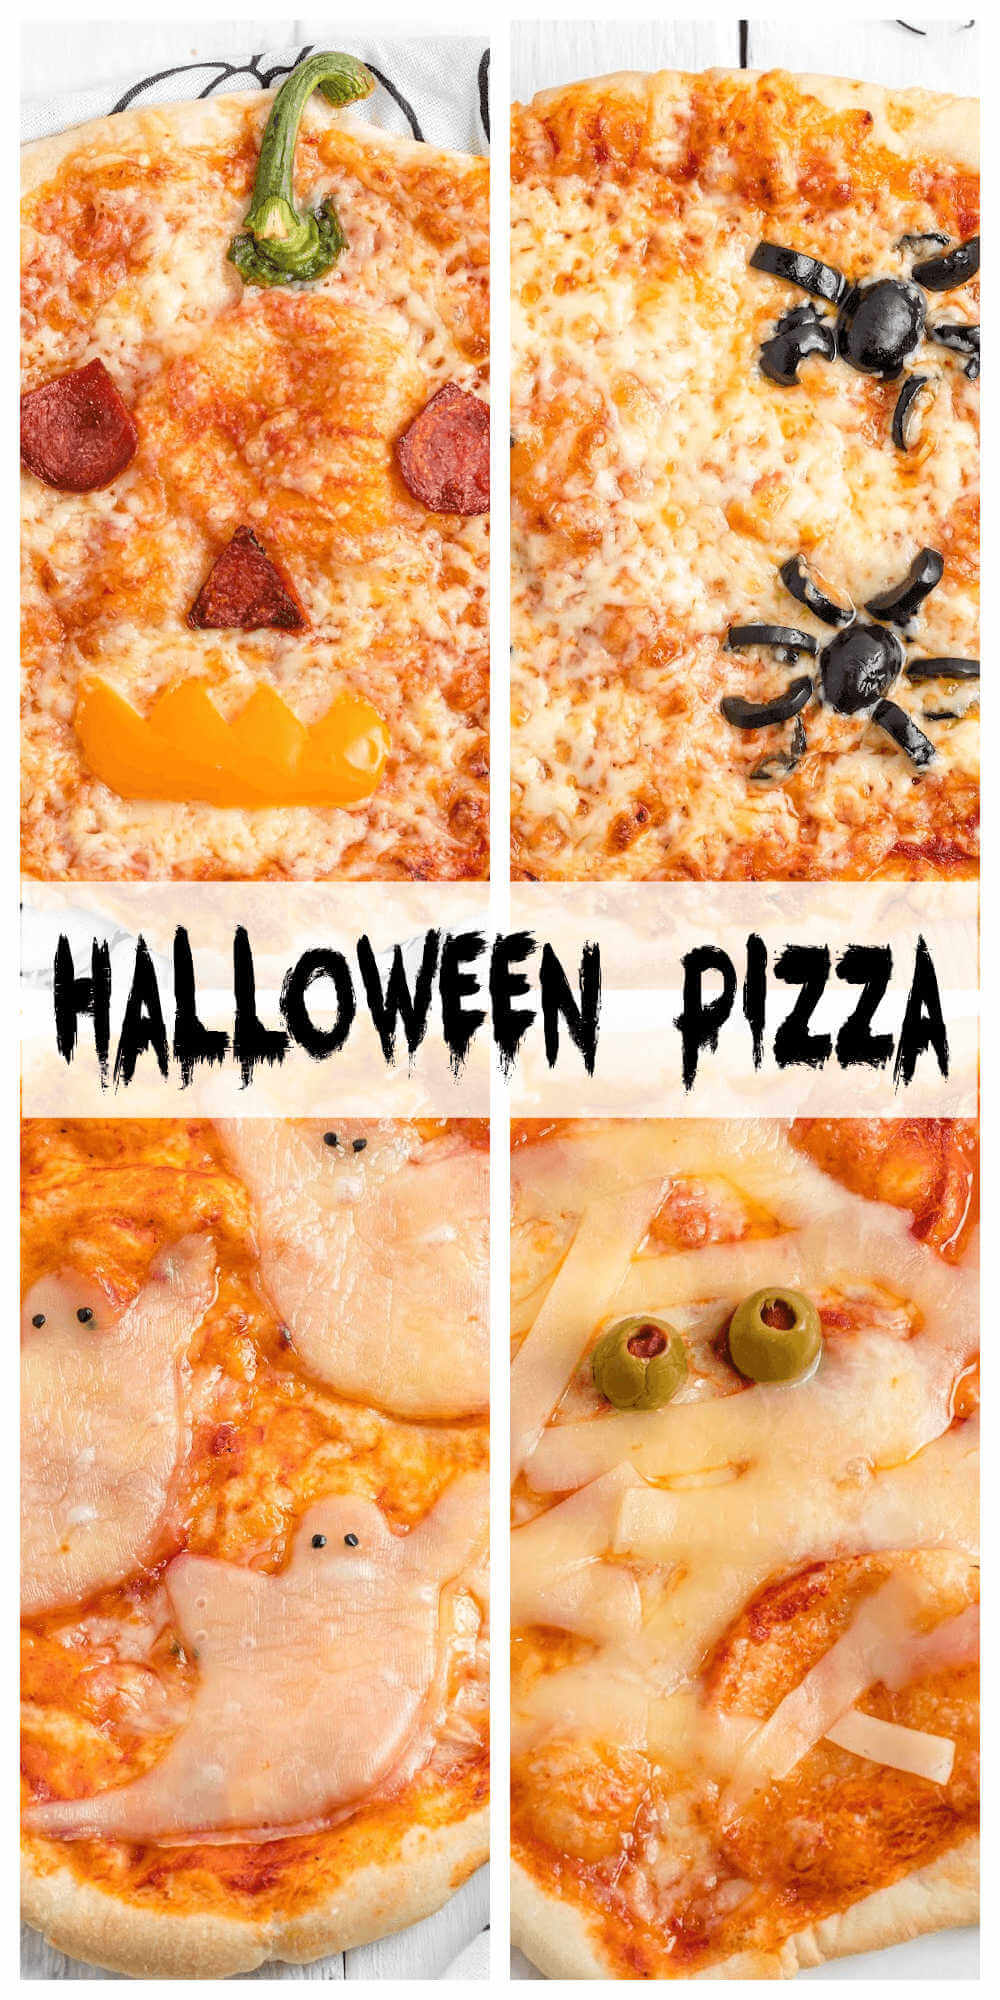 Halloween pizzas ideas for a fun halloween pizza party. Cut up the pieces ahead of time and let everyone make their own scary mini-pizza. If you're short own time on Halloween night, purchase frozen pizzas and decorate them however you like. #halloween_pizza, #fun_pizza_ideas, #halloween_themed_pizza